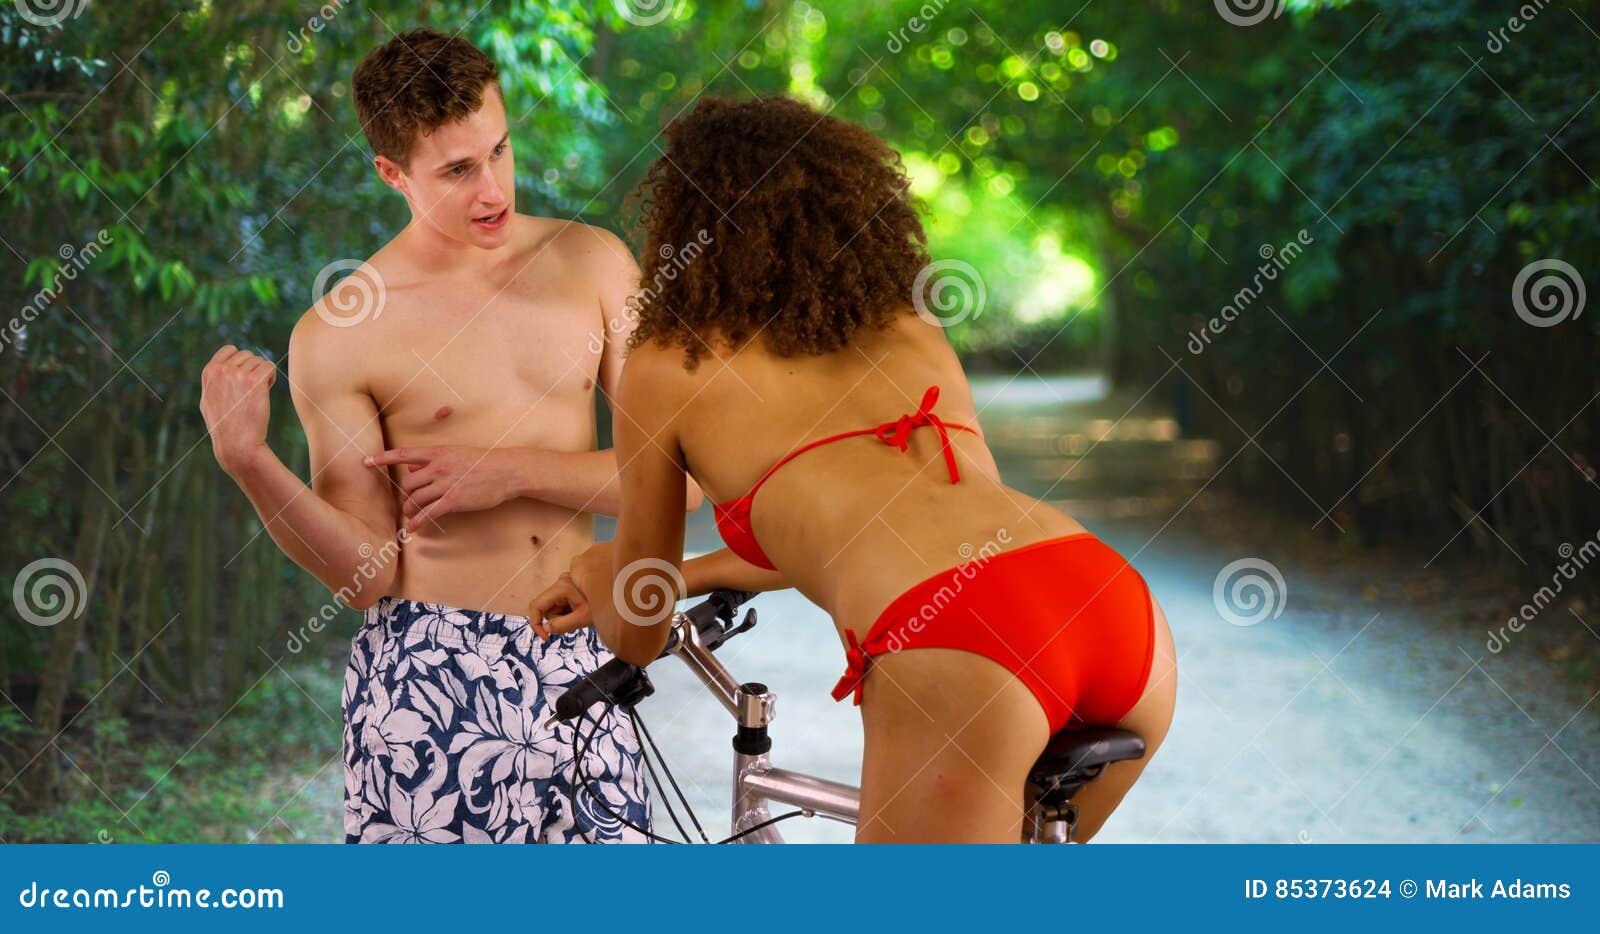 Infect Operate Systematically Good Looking Caucasian Male Showing Off Muscles To Cute Bikini Girl. Stock  Photo - Image of caribbean, outdoor: 85373624